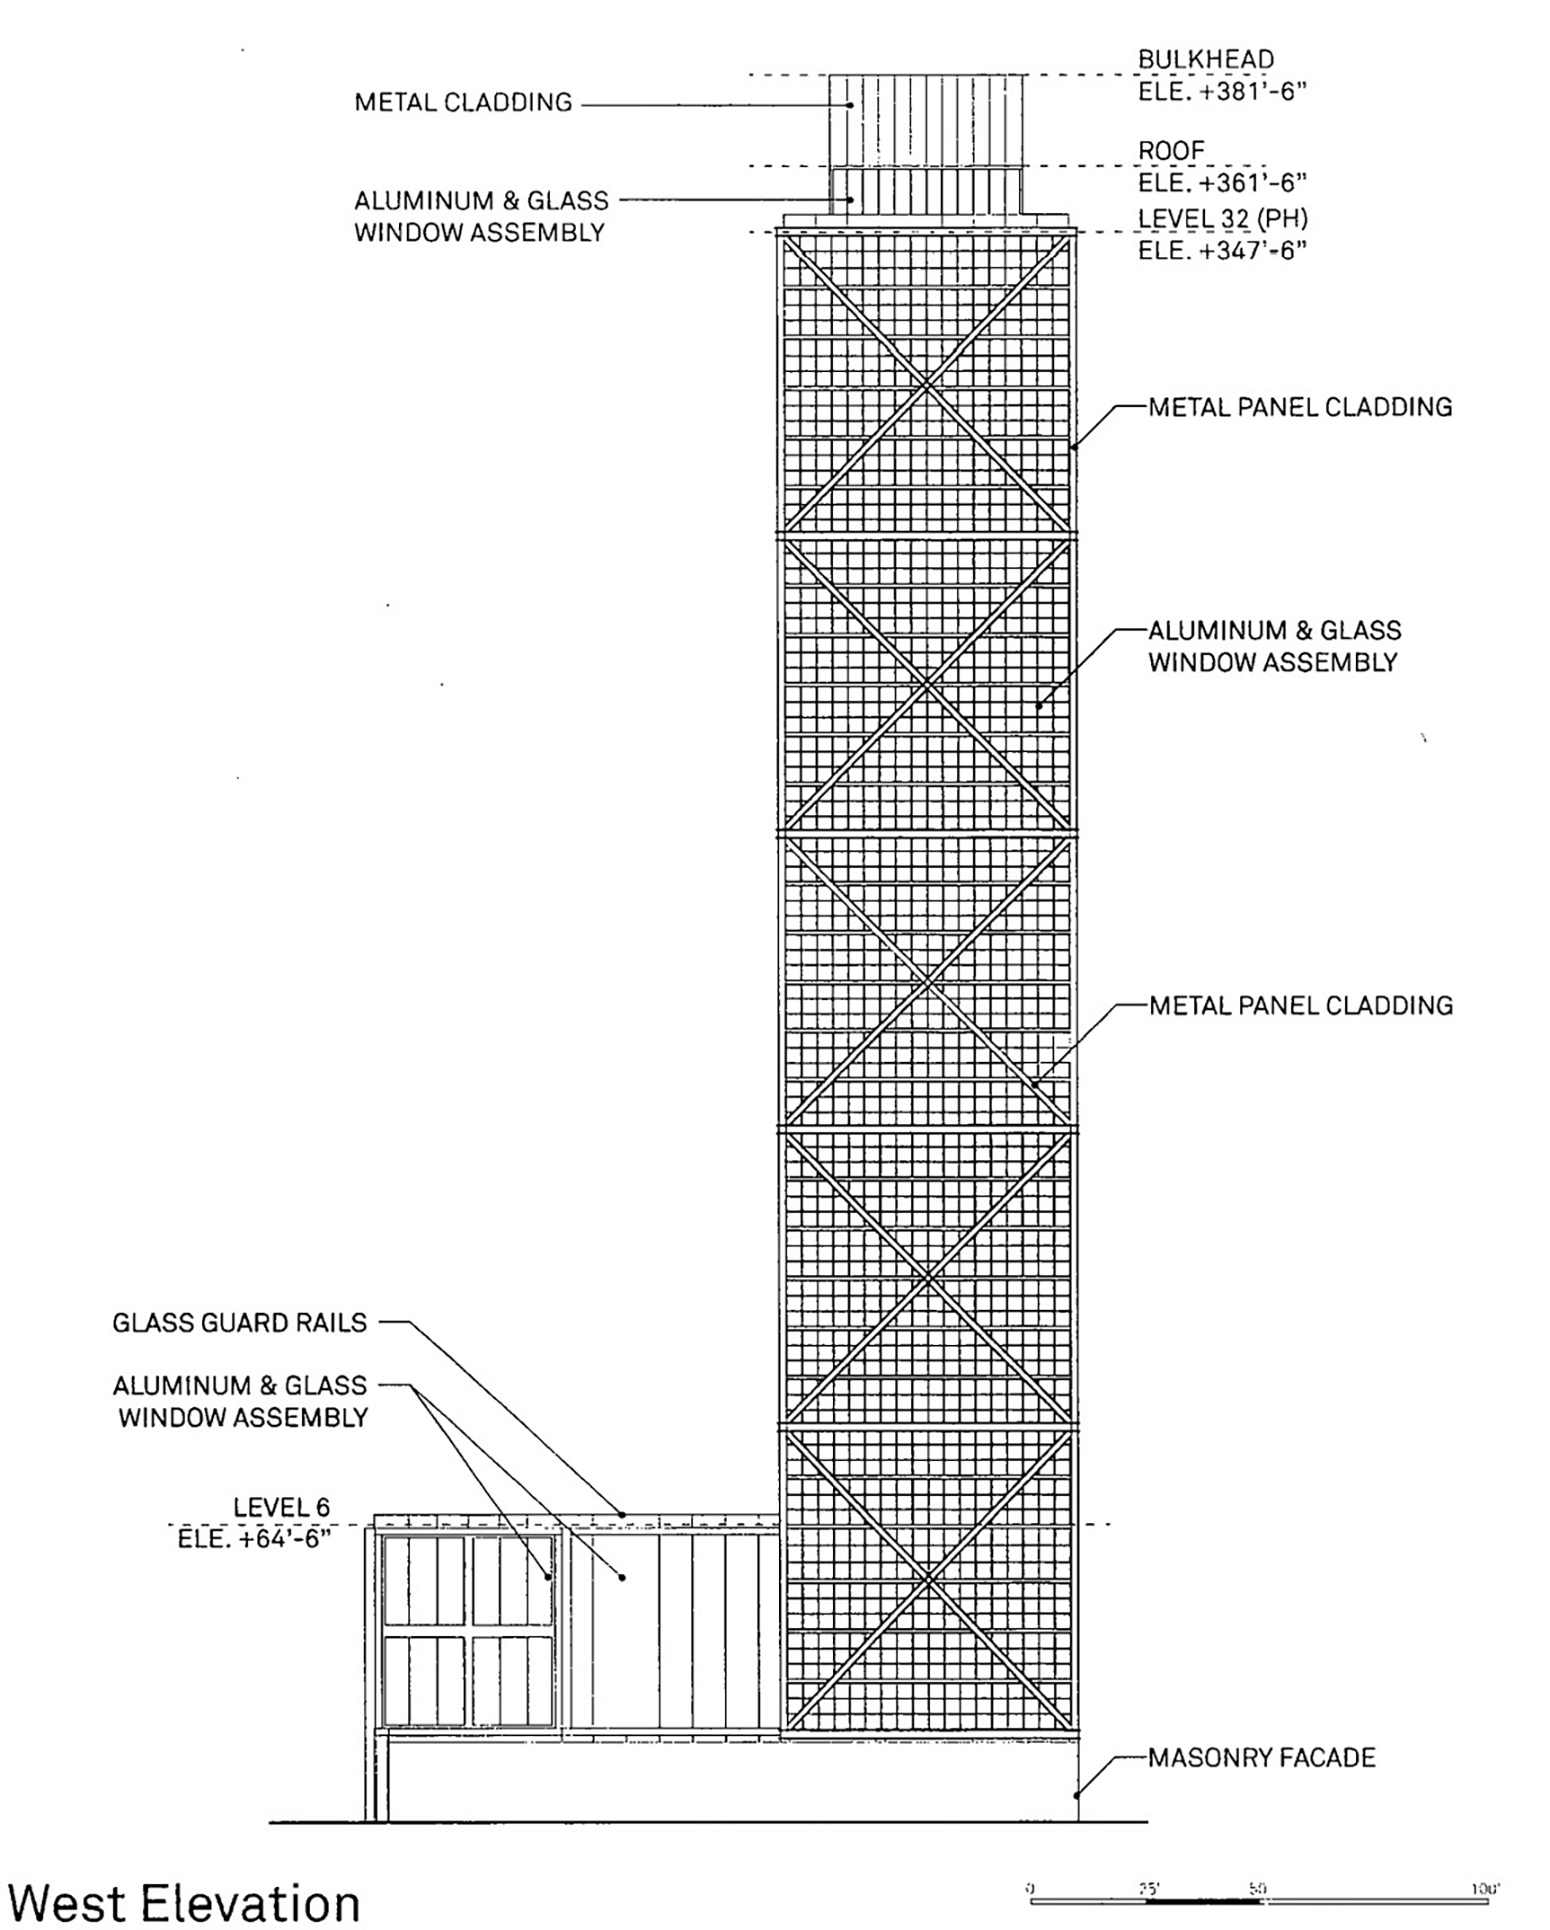 West Elevation for 1201 W Fulton Market. Drawing by Morris Adjmi Architects